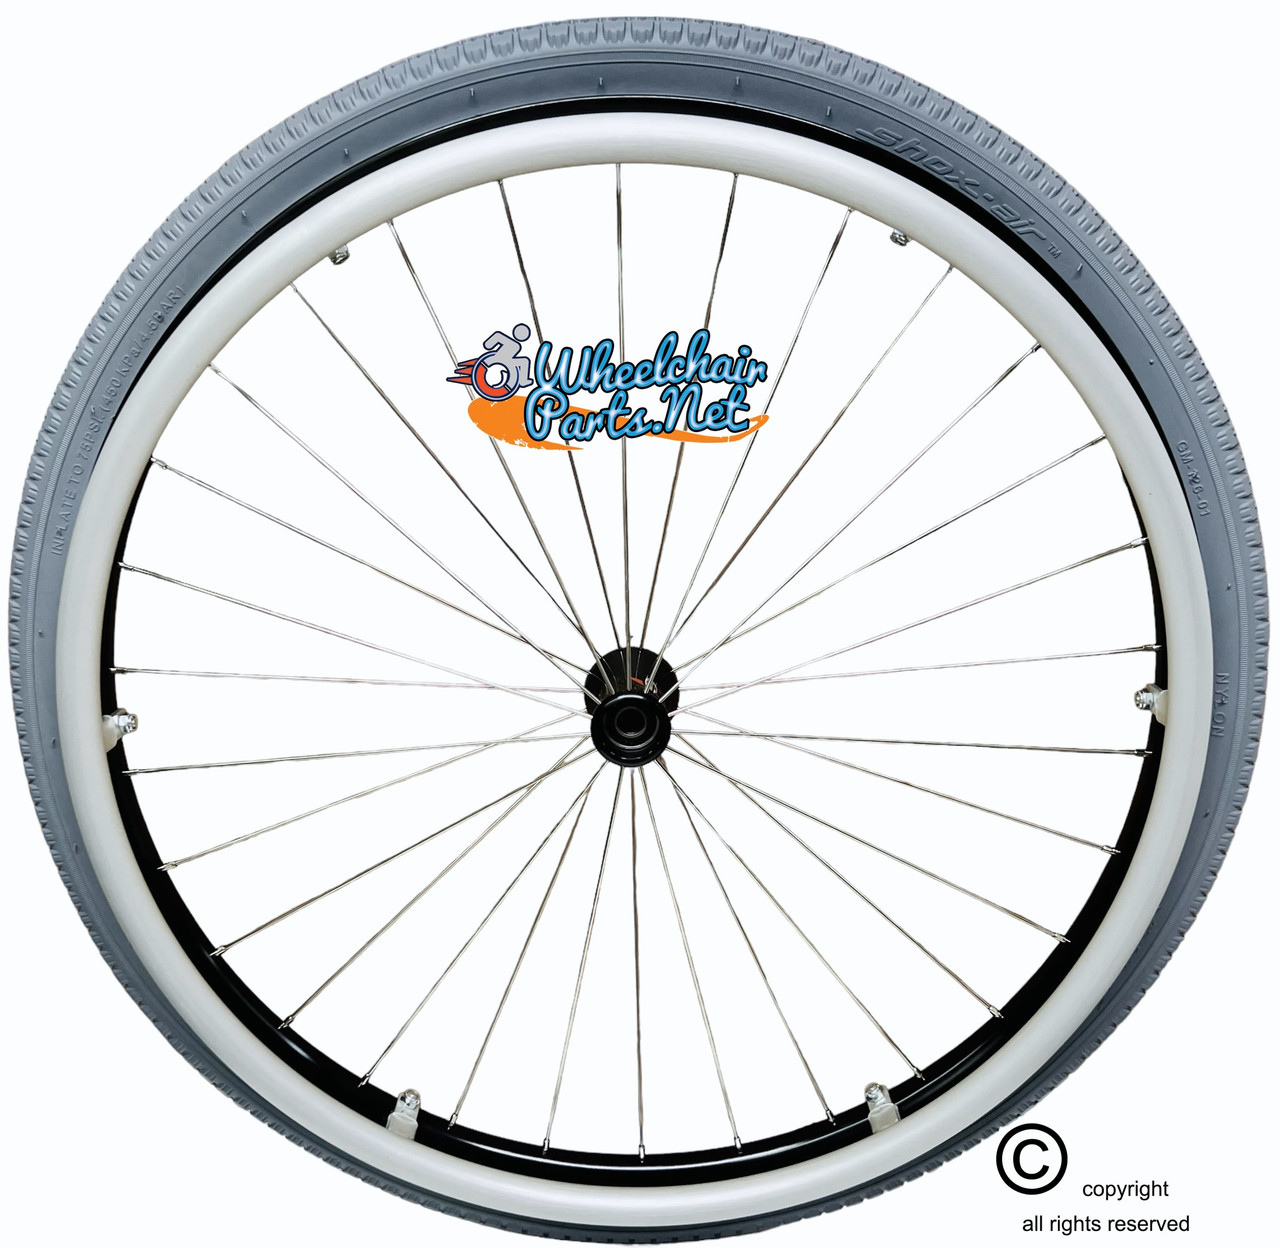 24" (540) - SPINERGY 30 SPOKE REAR WHEEL WITH SHOX-AIR PNEUMATIC TIRE